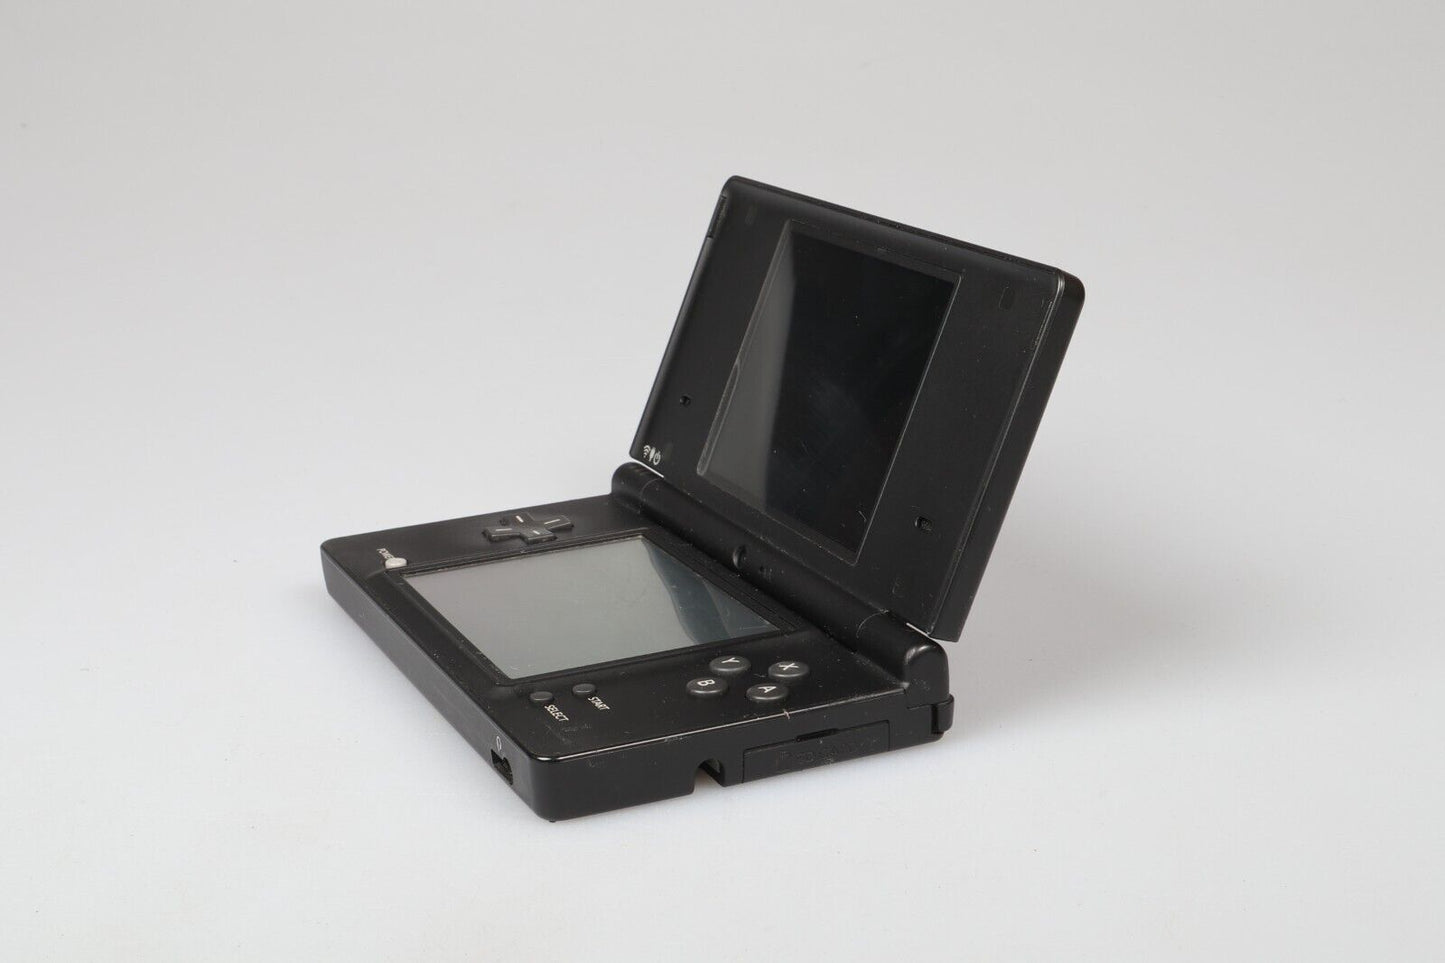 Nintendo DS | TWL-001 (EUR) | Black (NO CHARGER AND STYLUS)